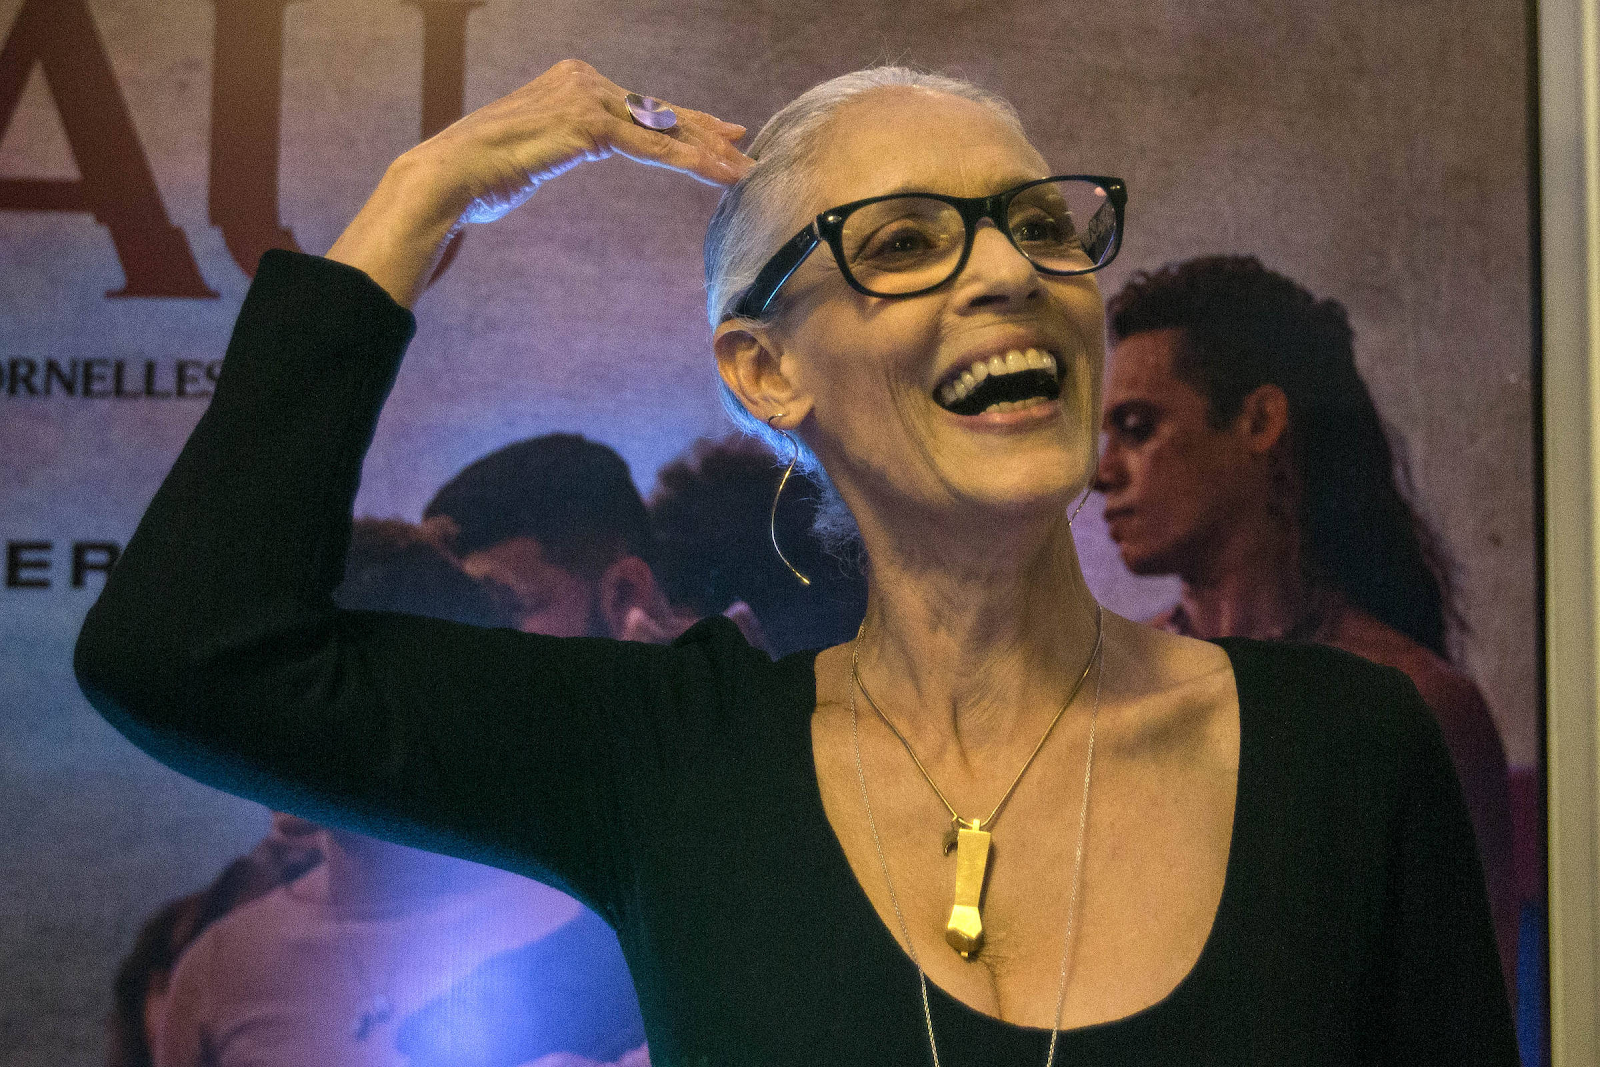 On Wednesday, November 25th, the New York Times published a list of the top 25 actors of the 21st century to date. Brazilian actress Sonia Braga is ranked 24th.